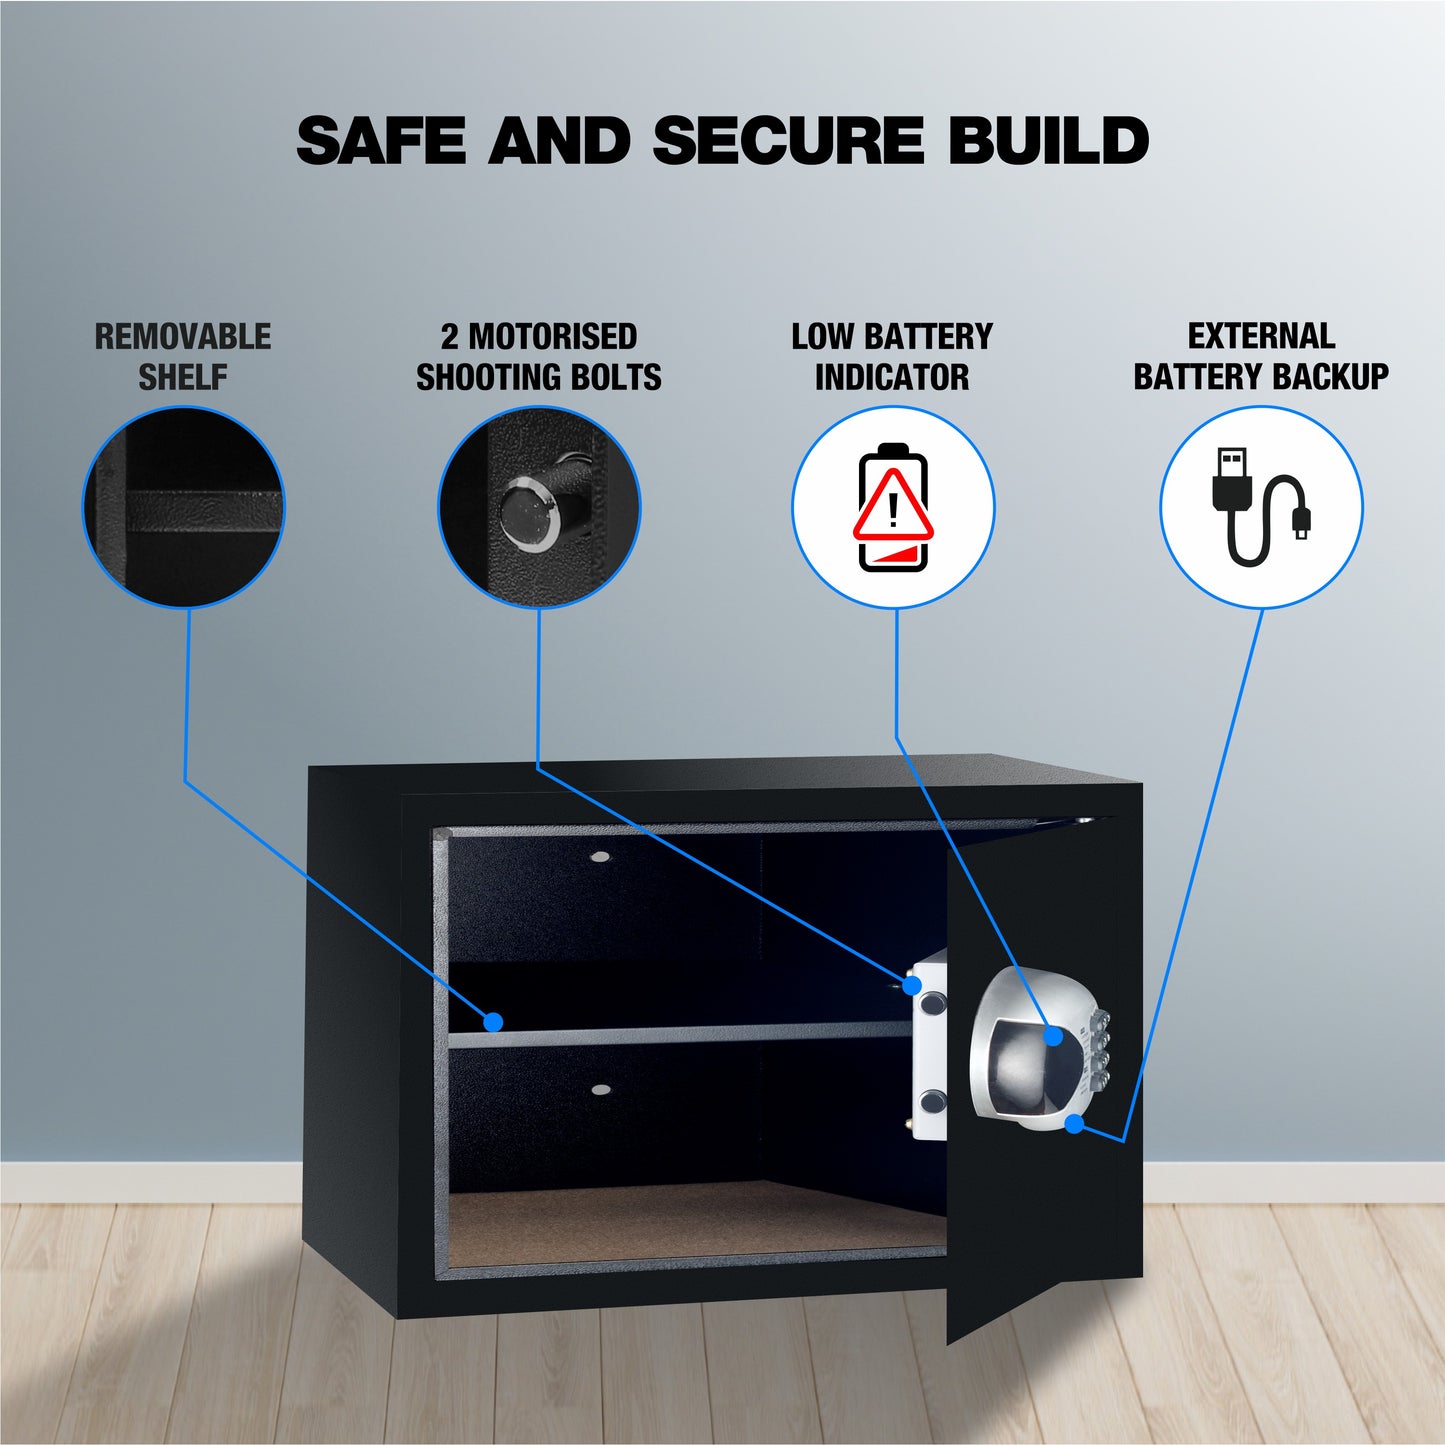 Ozone Digital Safe for Homes & Offices | 2-way Access | Password & Emergency Key (34.94 Ltrs.)